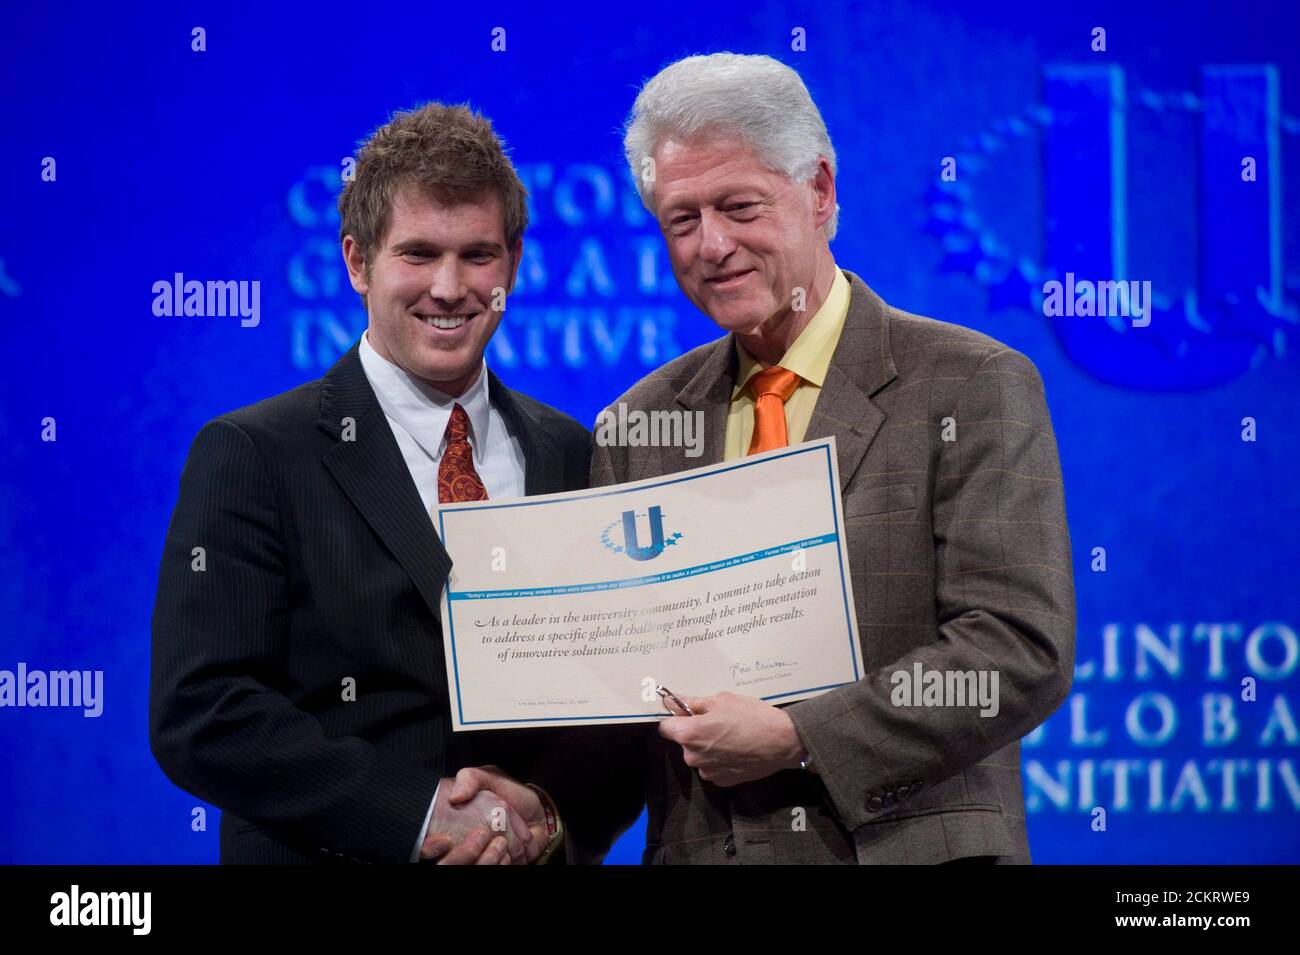 Austin, TX February 14, 2009: Former President Bill Clinton hands out an award at the second-annual Clinton Global Initiative University, a conference bringing together students to take action on global challenges such as poverty, hunger, energy, climate change and global health. The program is patterned after Clinton Global Initiative Foundation formed by President Bill Clinton. ©Bob Daemmrich Stock Photo